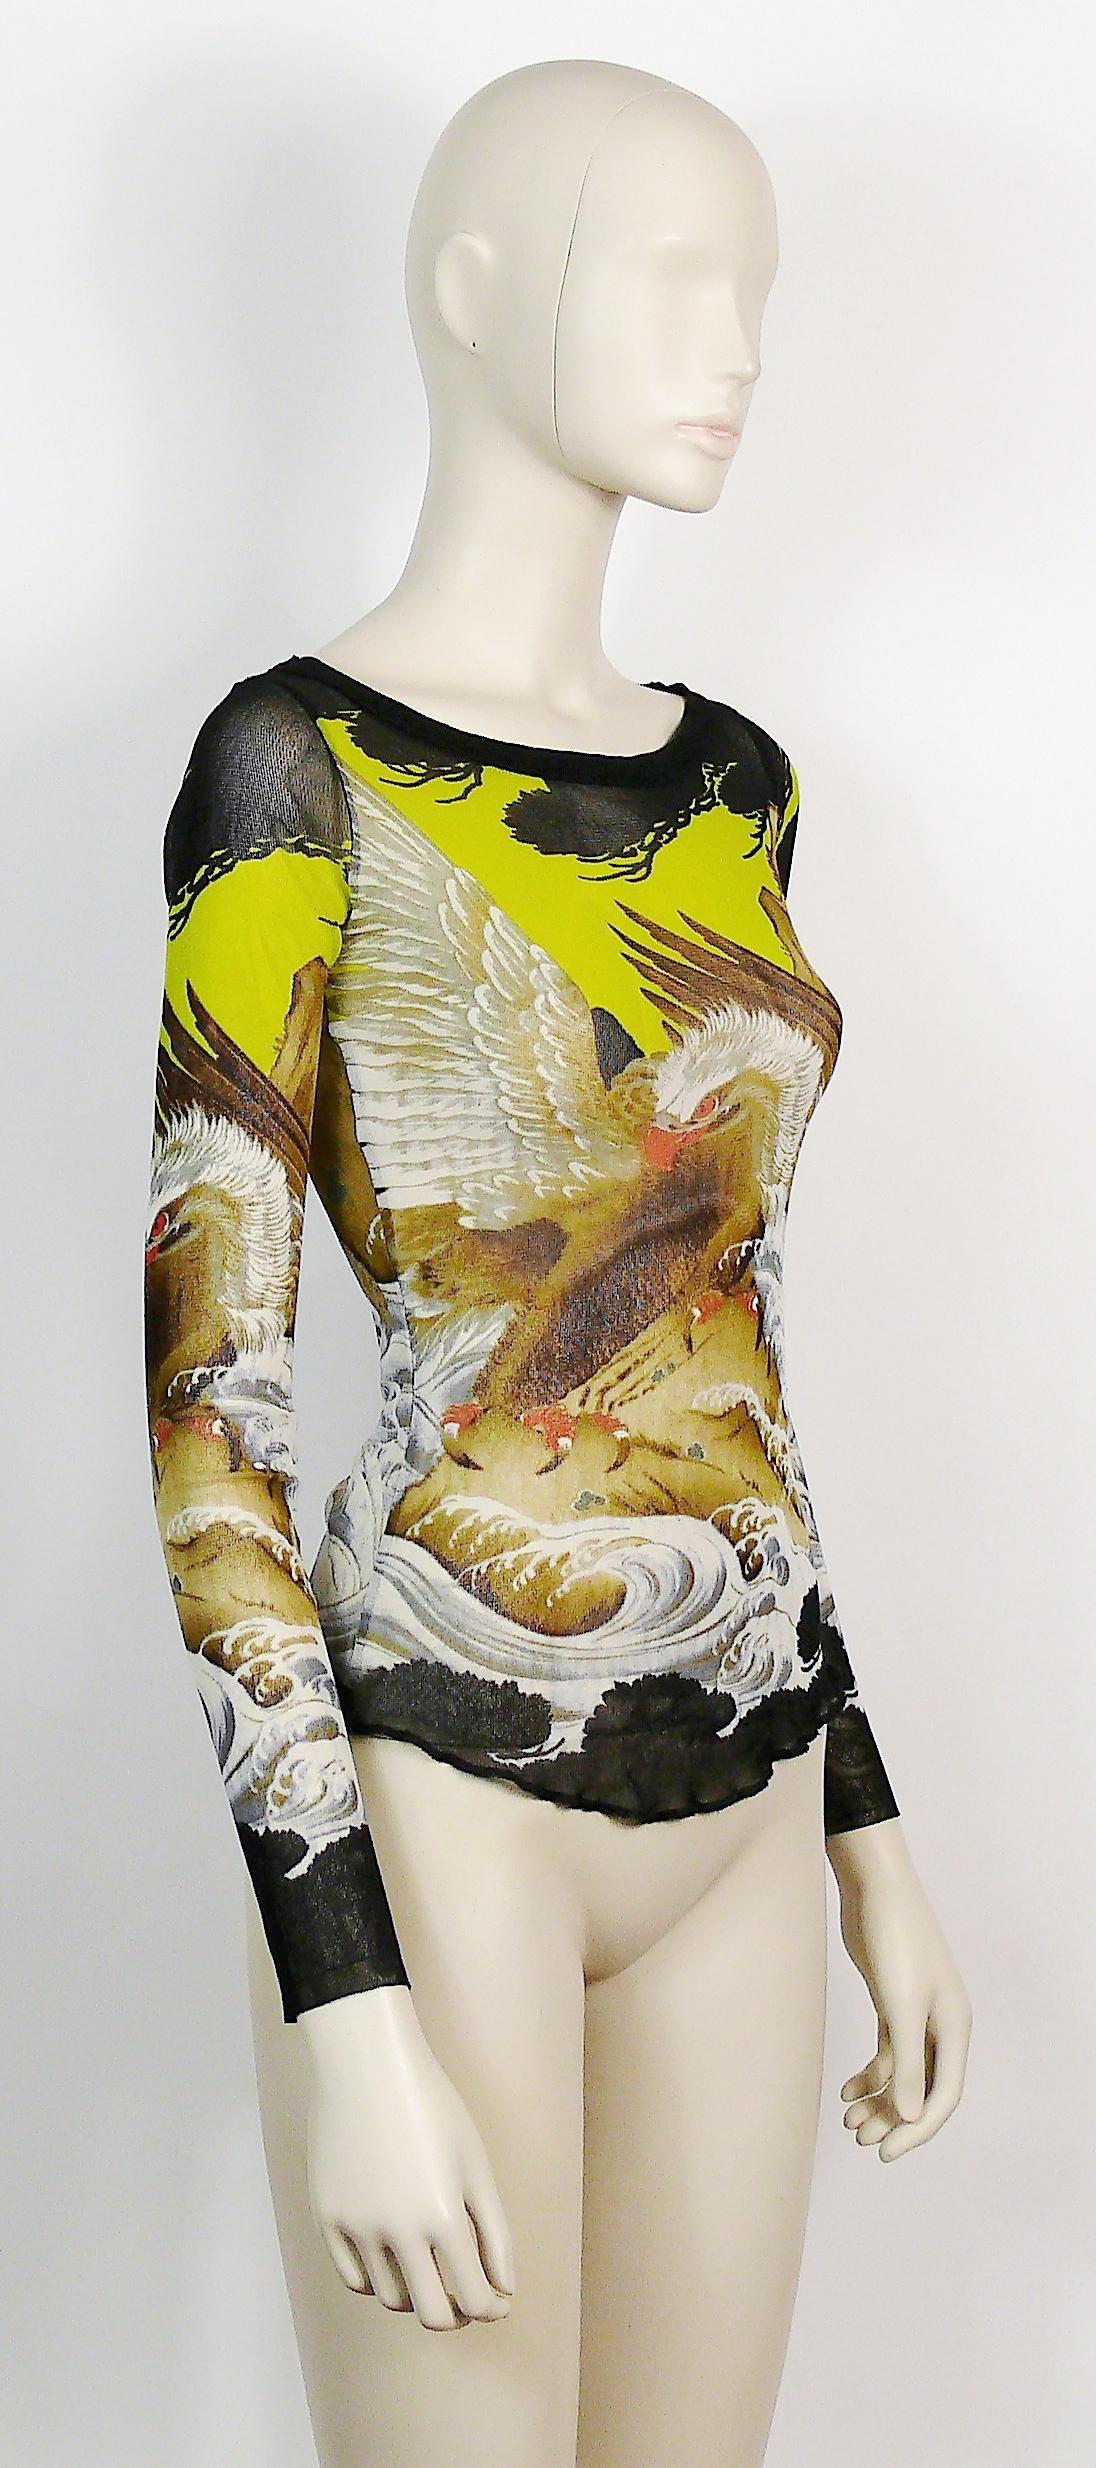 JEAN PAUL GAULTIER vintage eagle Japanese tattoo mesh top. 

Label reads JEAN PAUL GAULTIER Soleil.

Missing size label.
Please refer to measurements.

Missing composition tag (100% Nylon).

Indicative measurements taken laid flat and unstretched